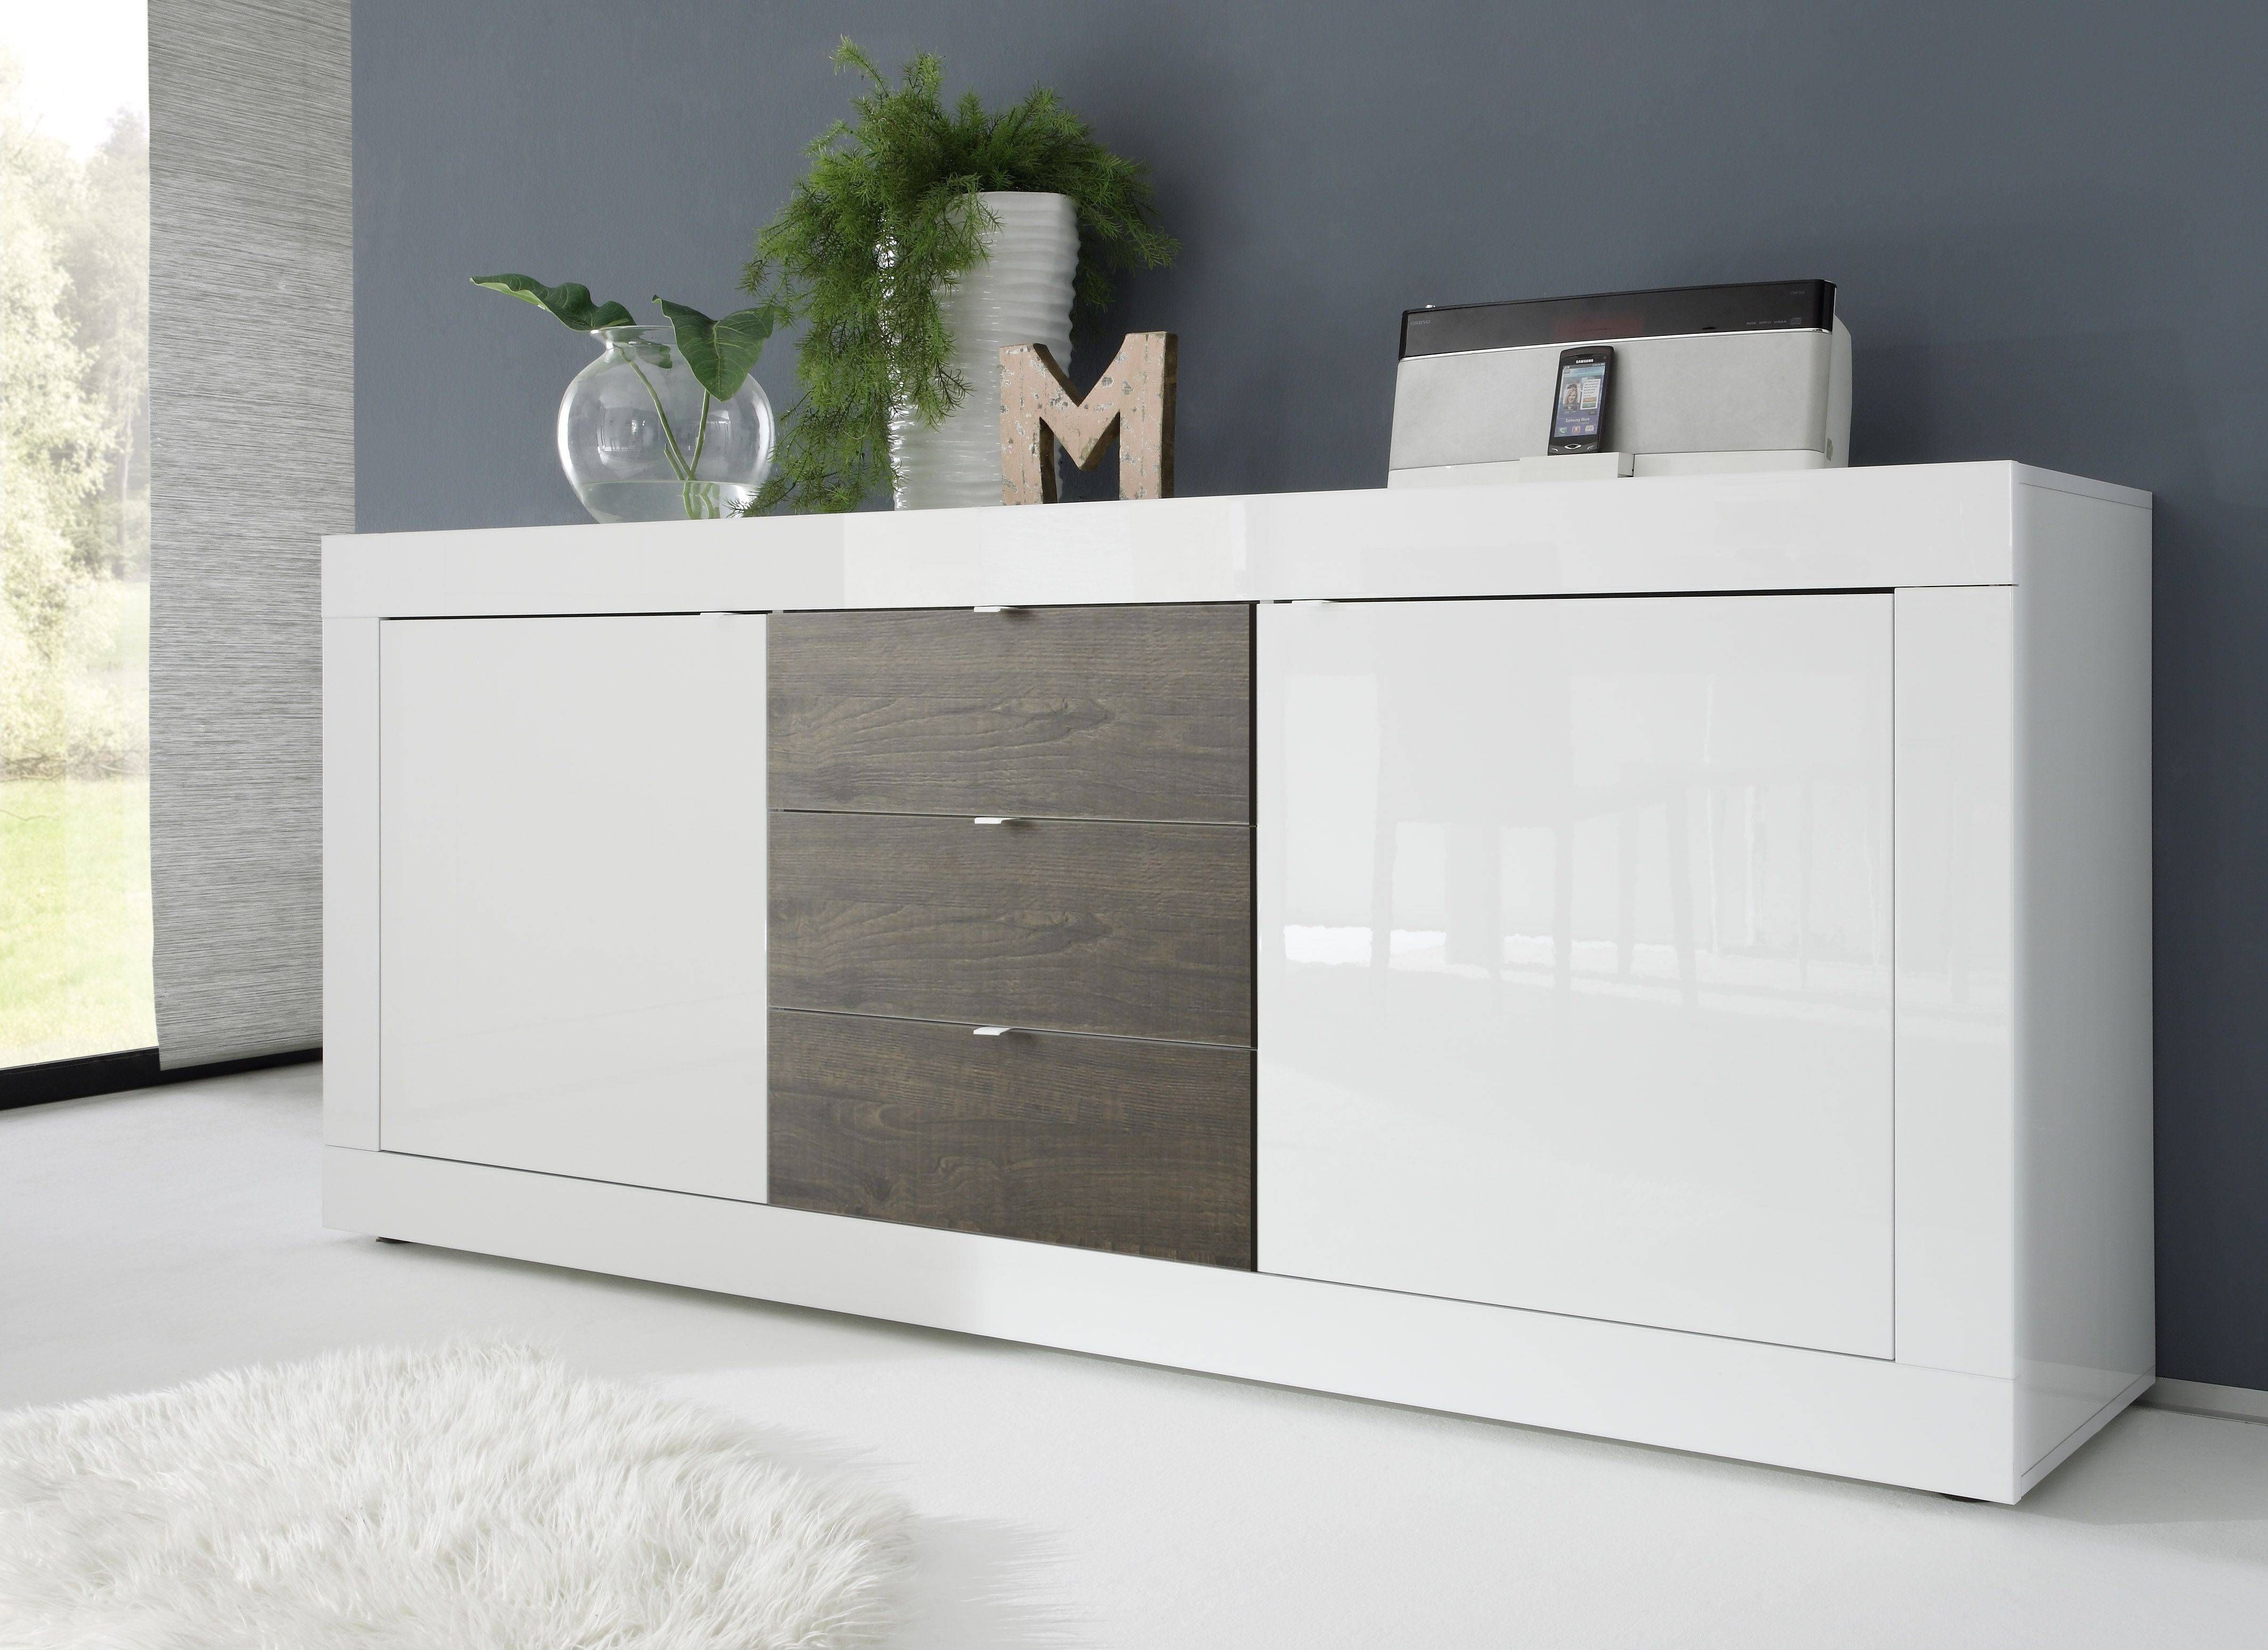 Dolcevita Ii White Gloss Sideboard – Sideboards – Sena Home Furniture With Regard To Cheap White High Gloss Sideboards (View 2 of 30)